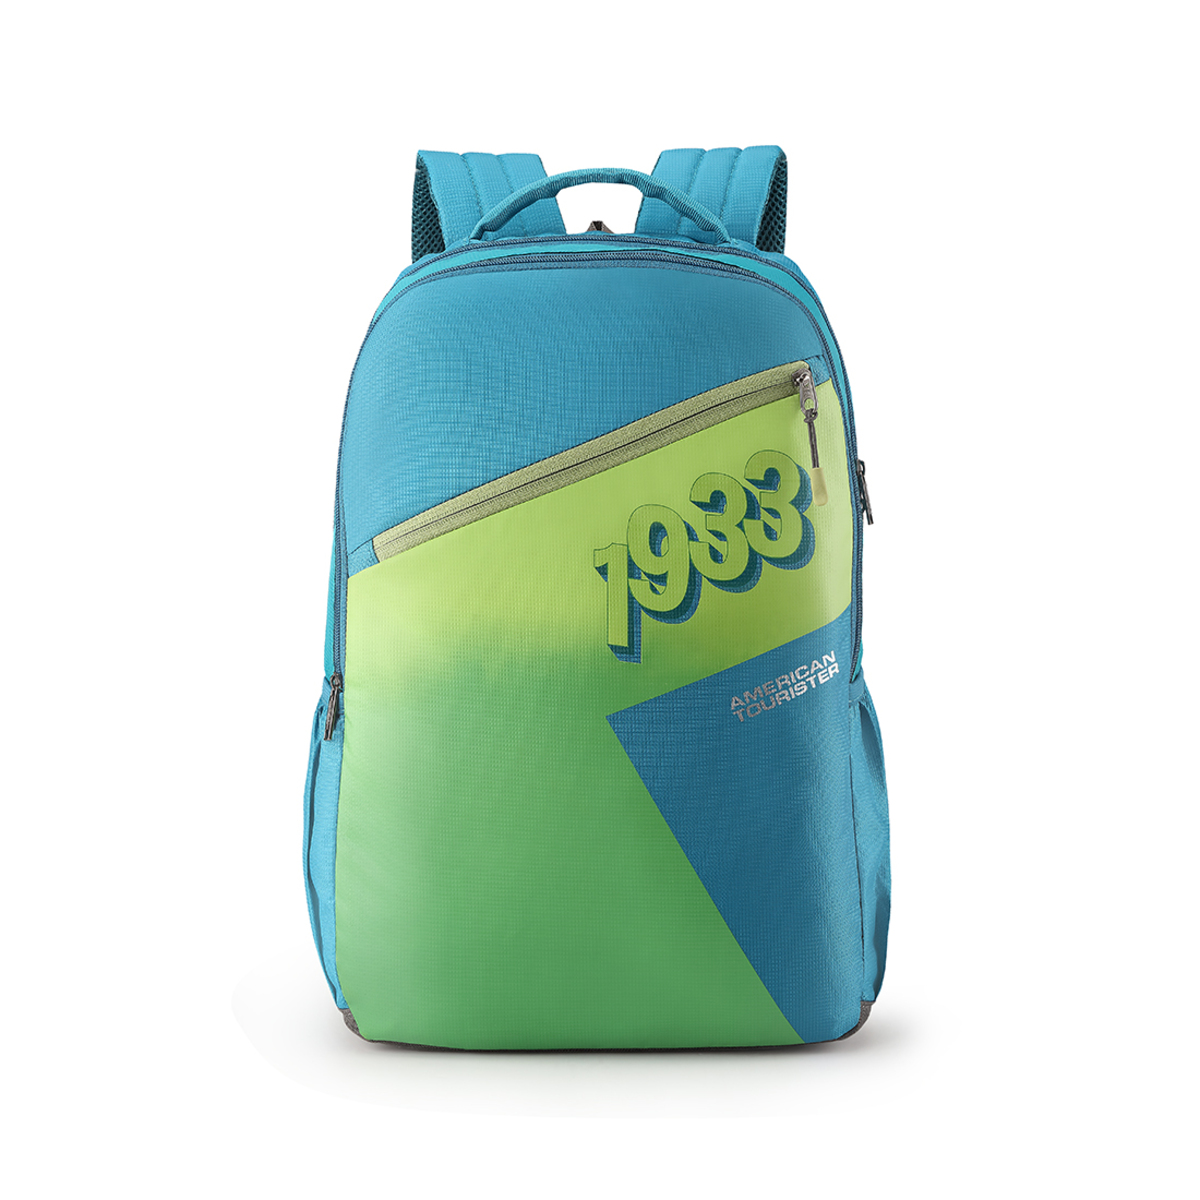 American Tourister Back Pack Twing 01 Teal